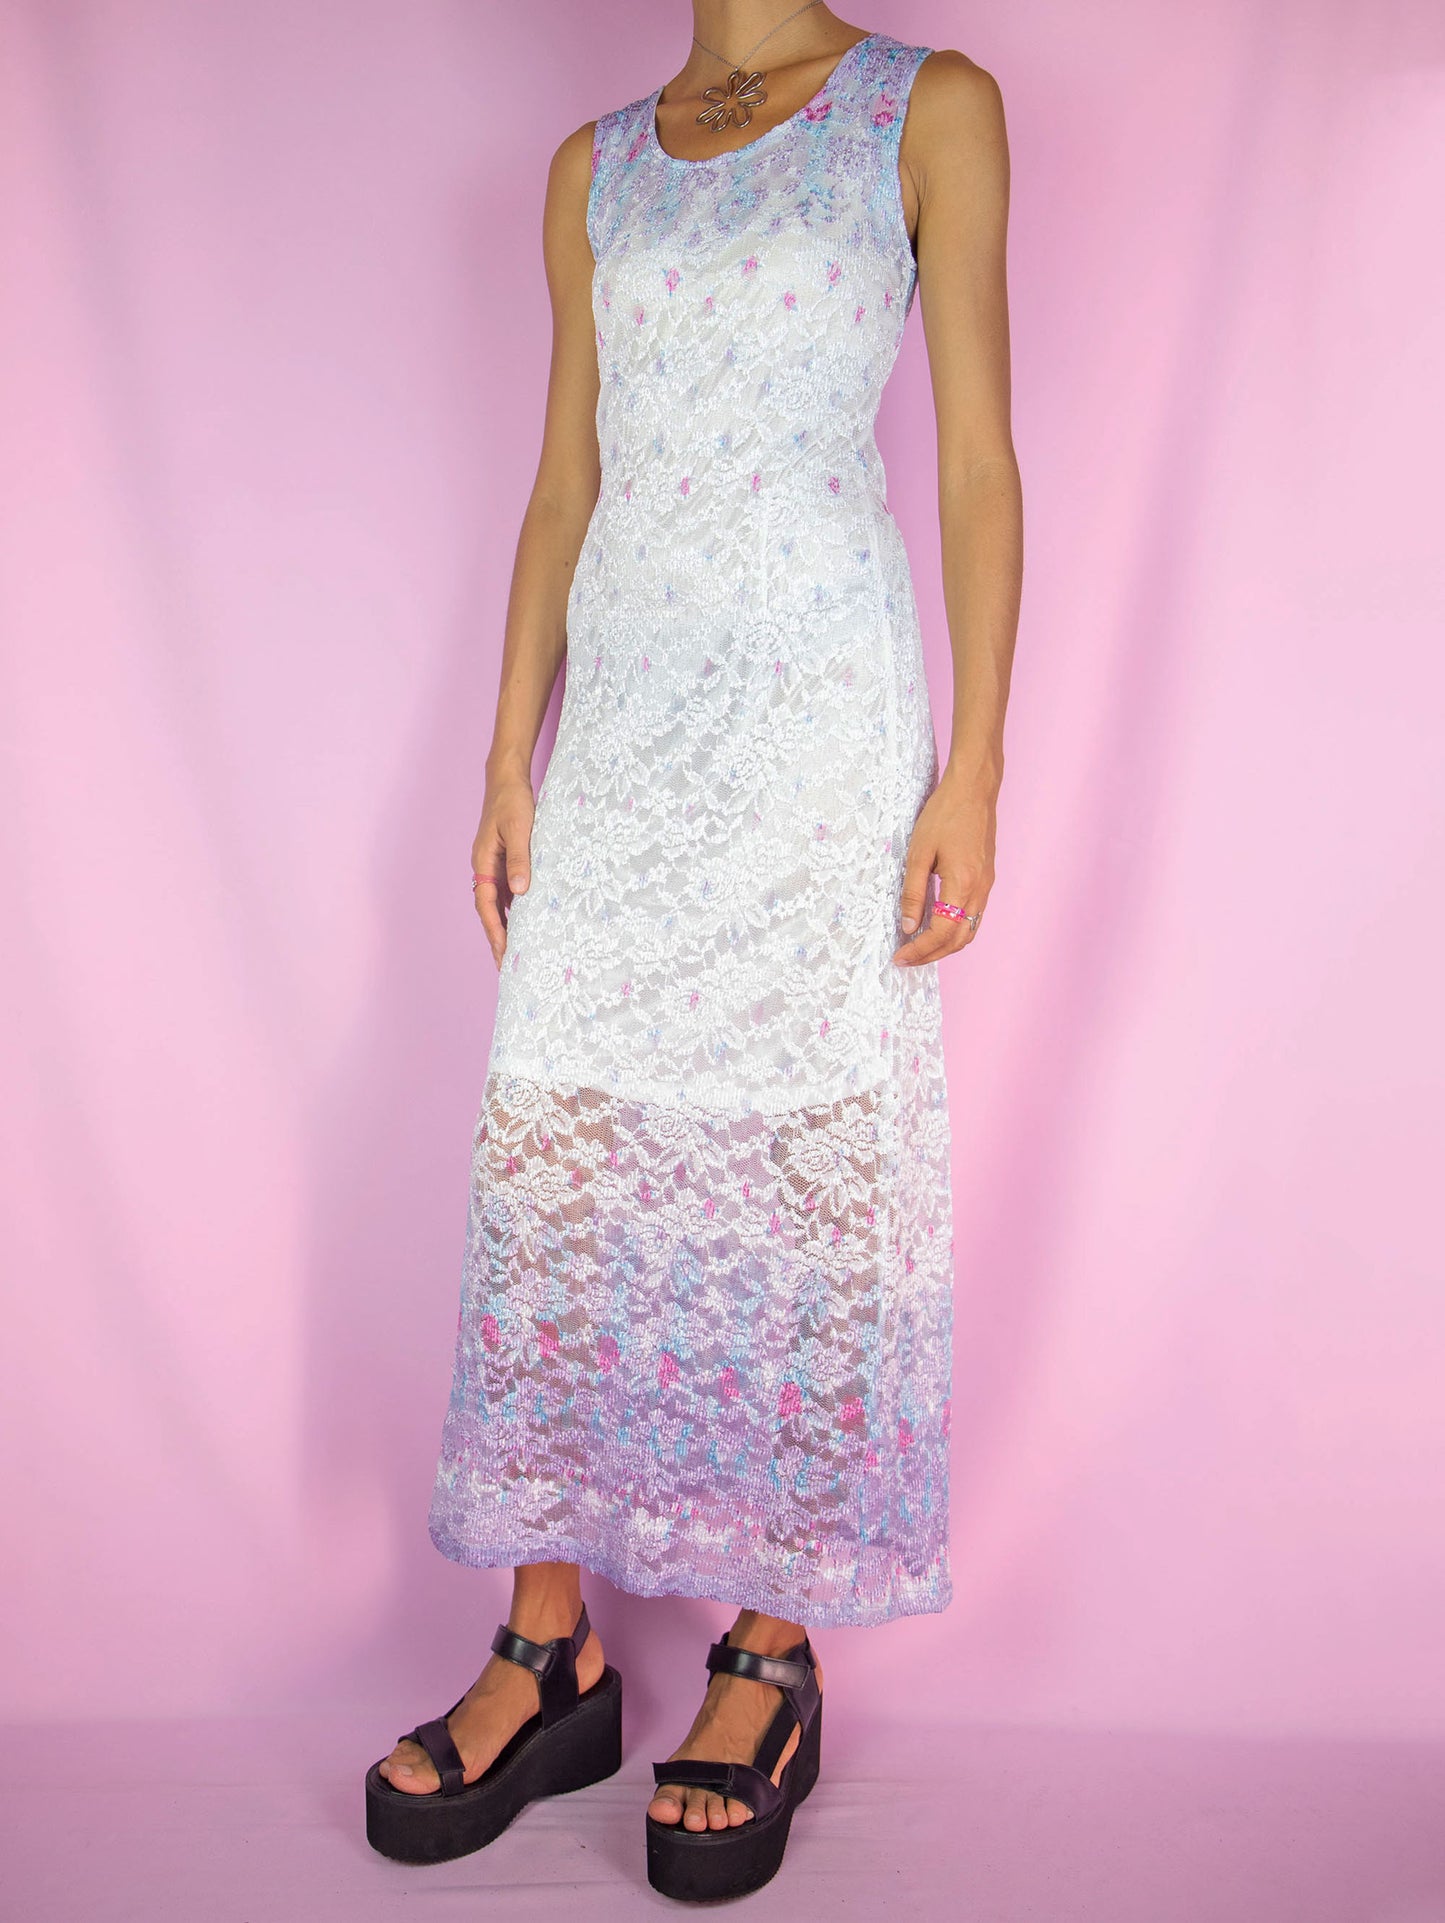 The Y2K White Lace Maxi Dress is a vintage 2000s romantic summer party style sleeveless semi-sheer midi dress that is tied at the back.